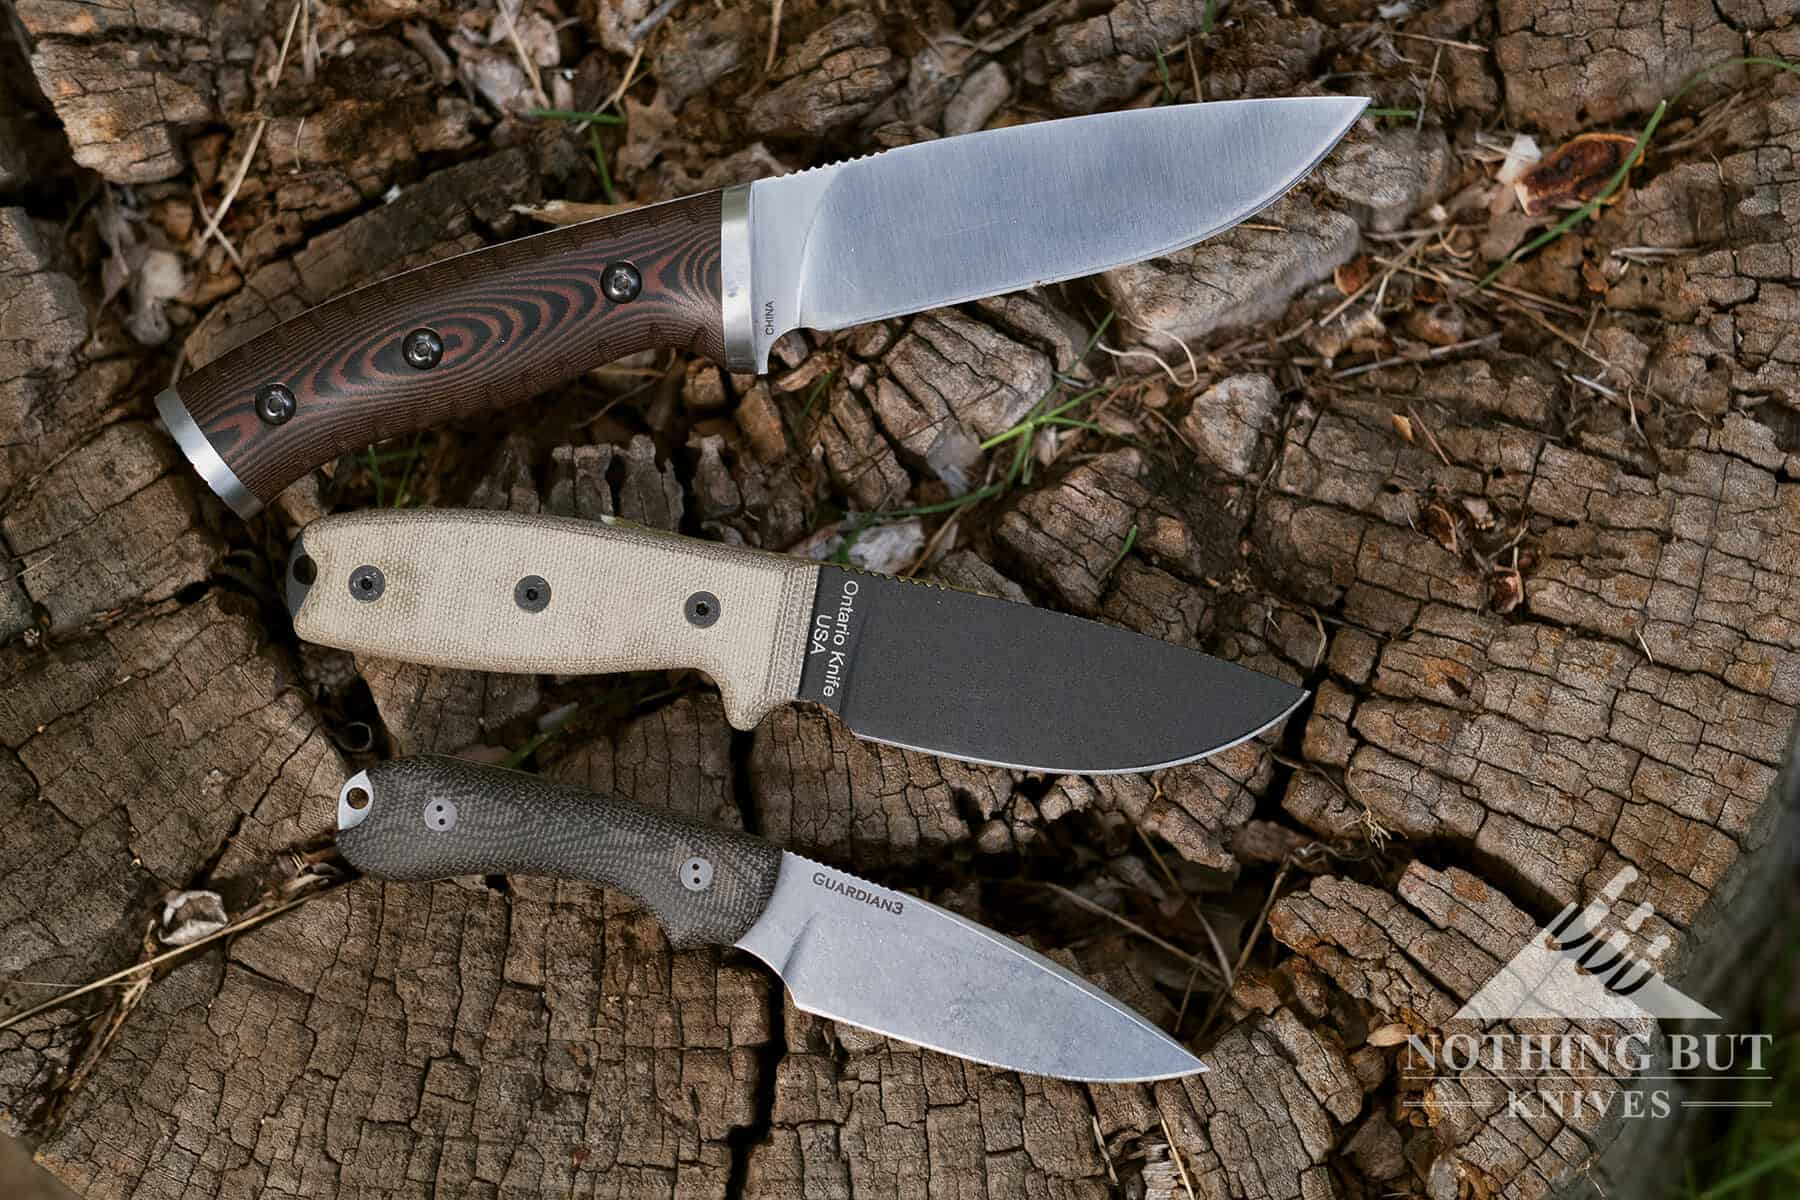 If you want to stay under $100, the Bradford Guardian 3 and the Buck Selkirk seem like good alternatives to the Rat 3.